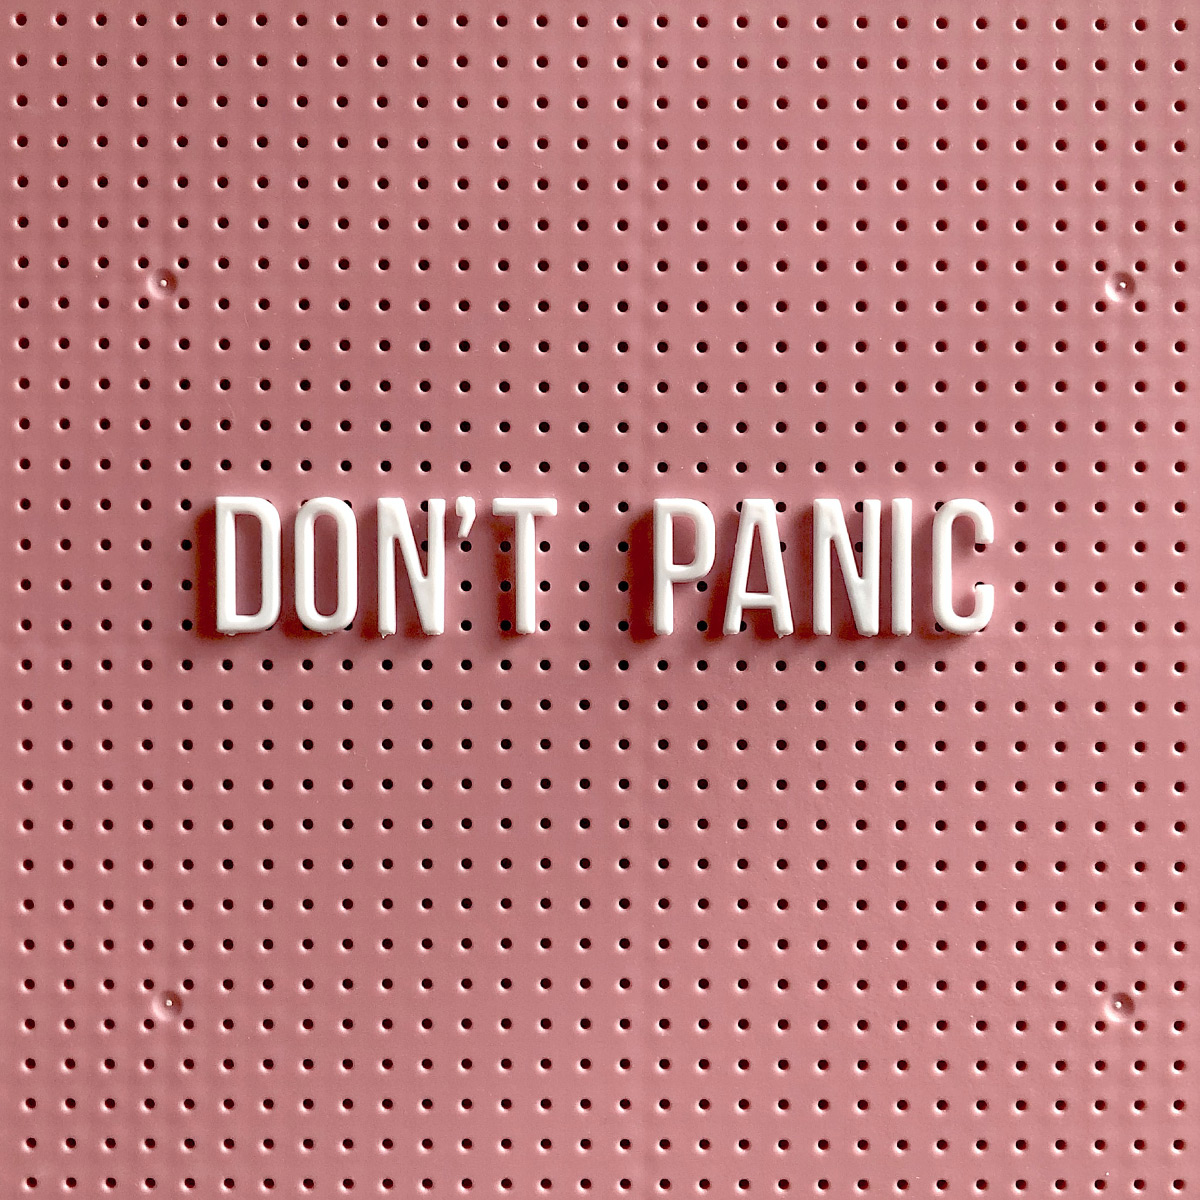 Don't panic spelled out